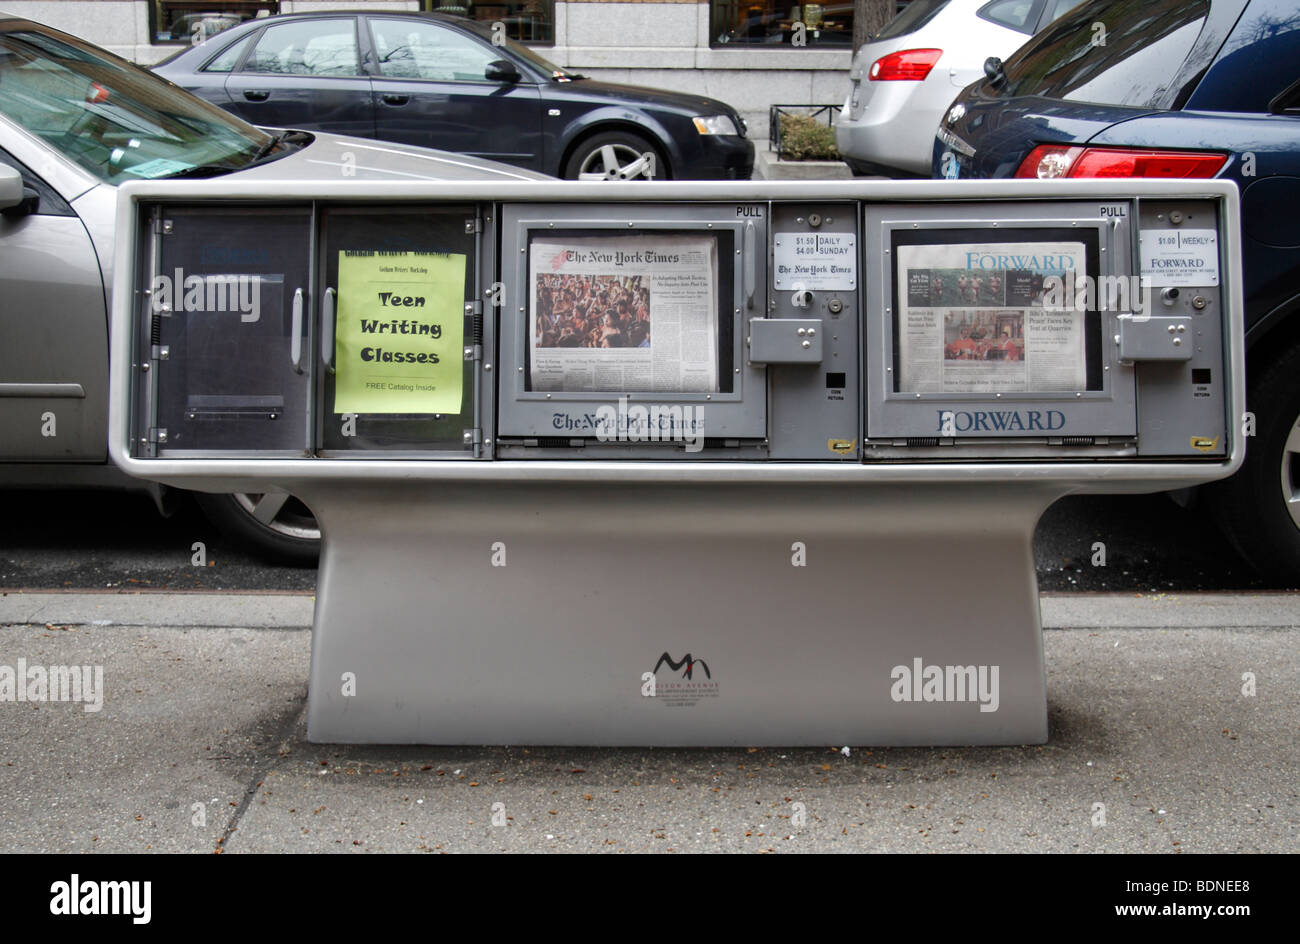 A road side newspaper stand for the New York Times and Forward Weekly Jewish newspaper, New York City, United States. Stock Photo